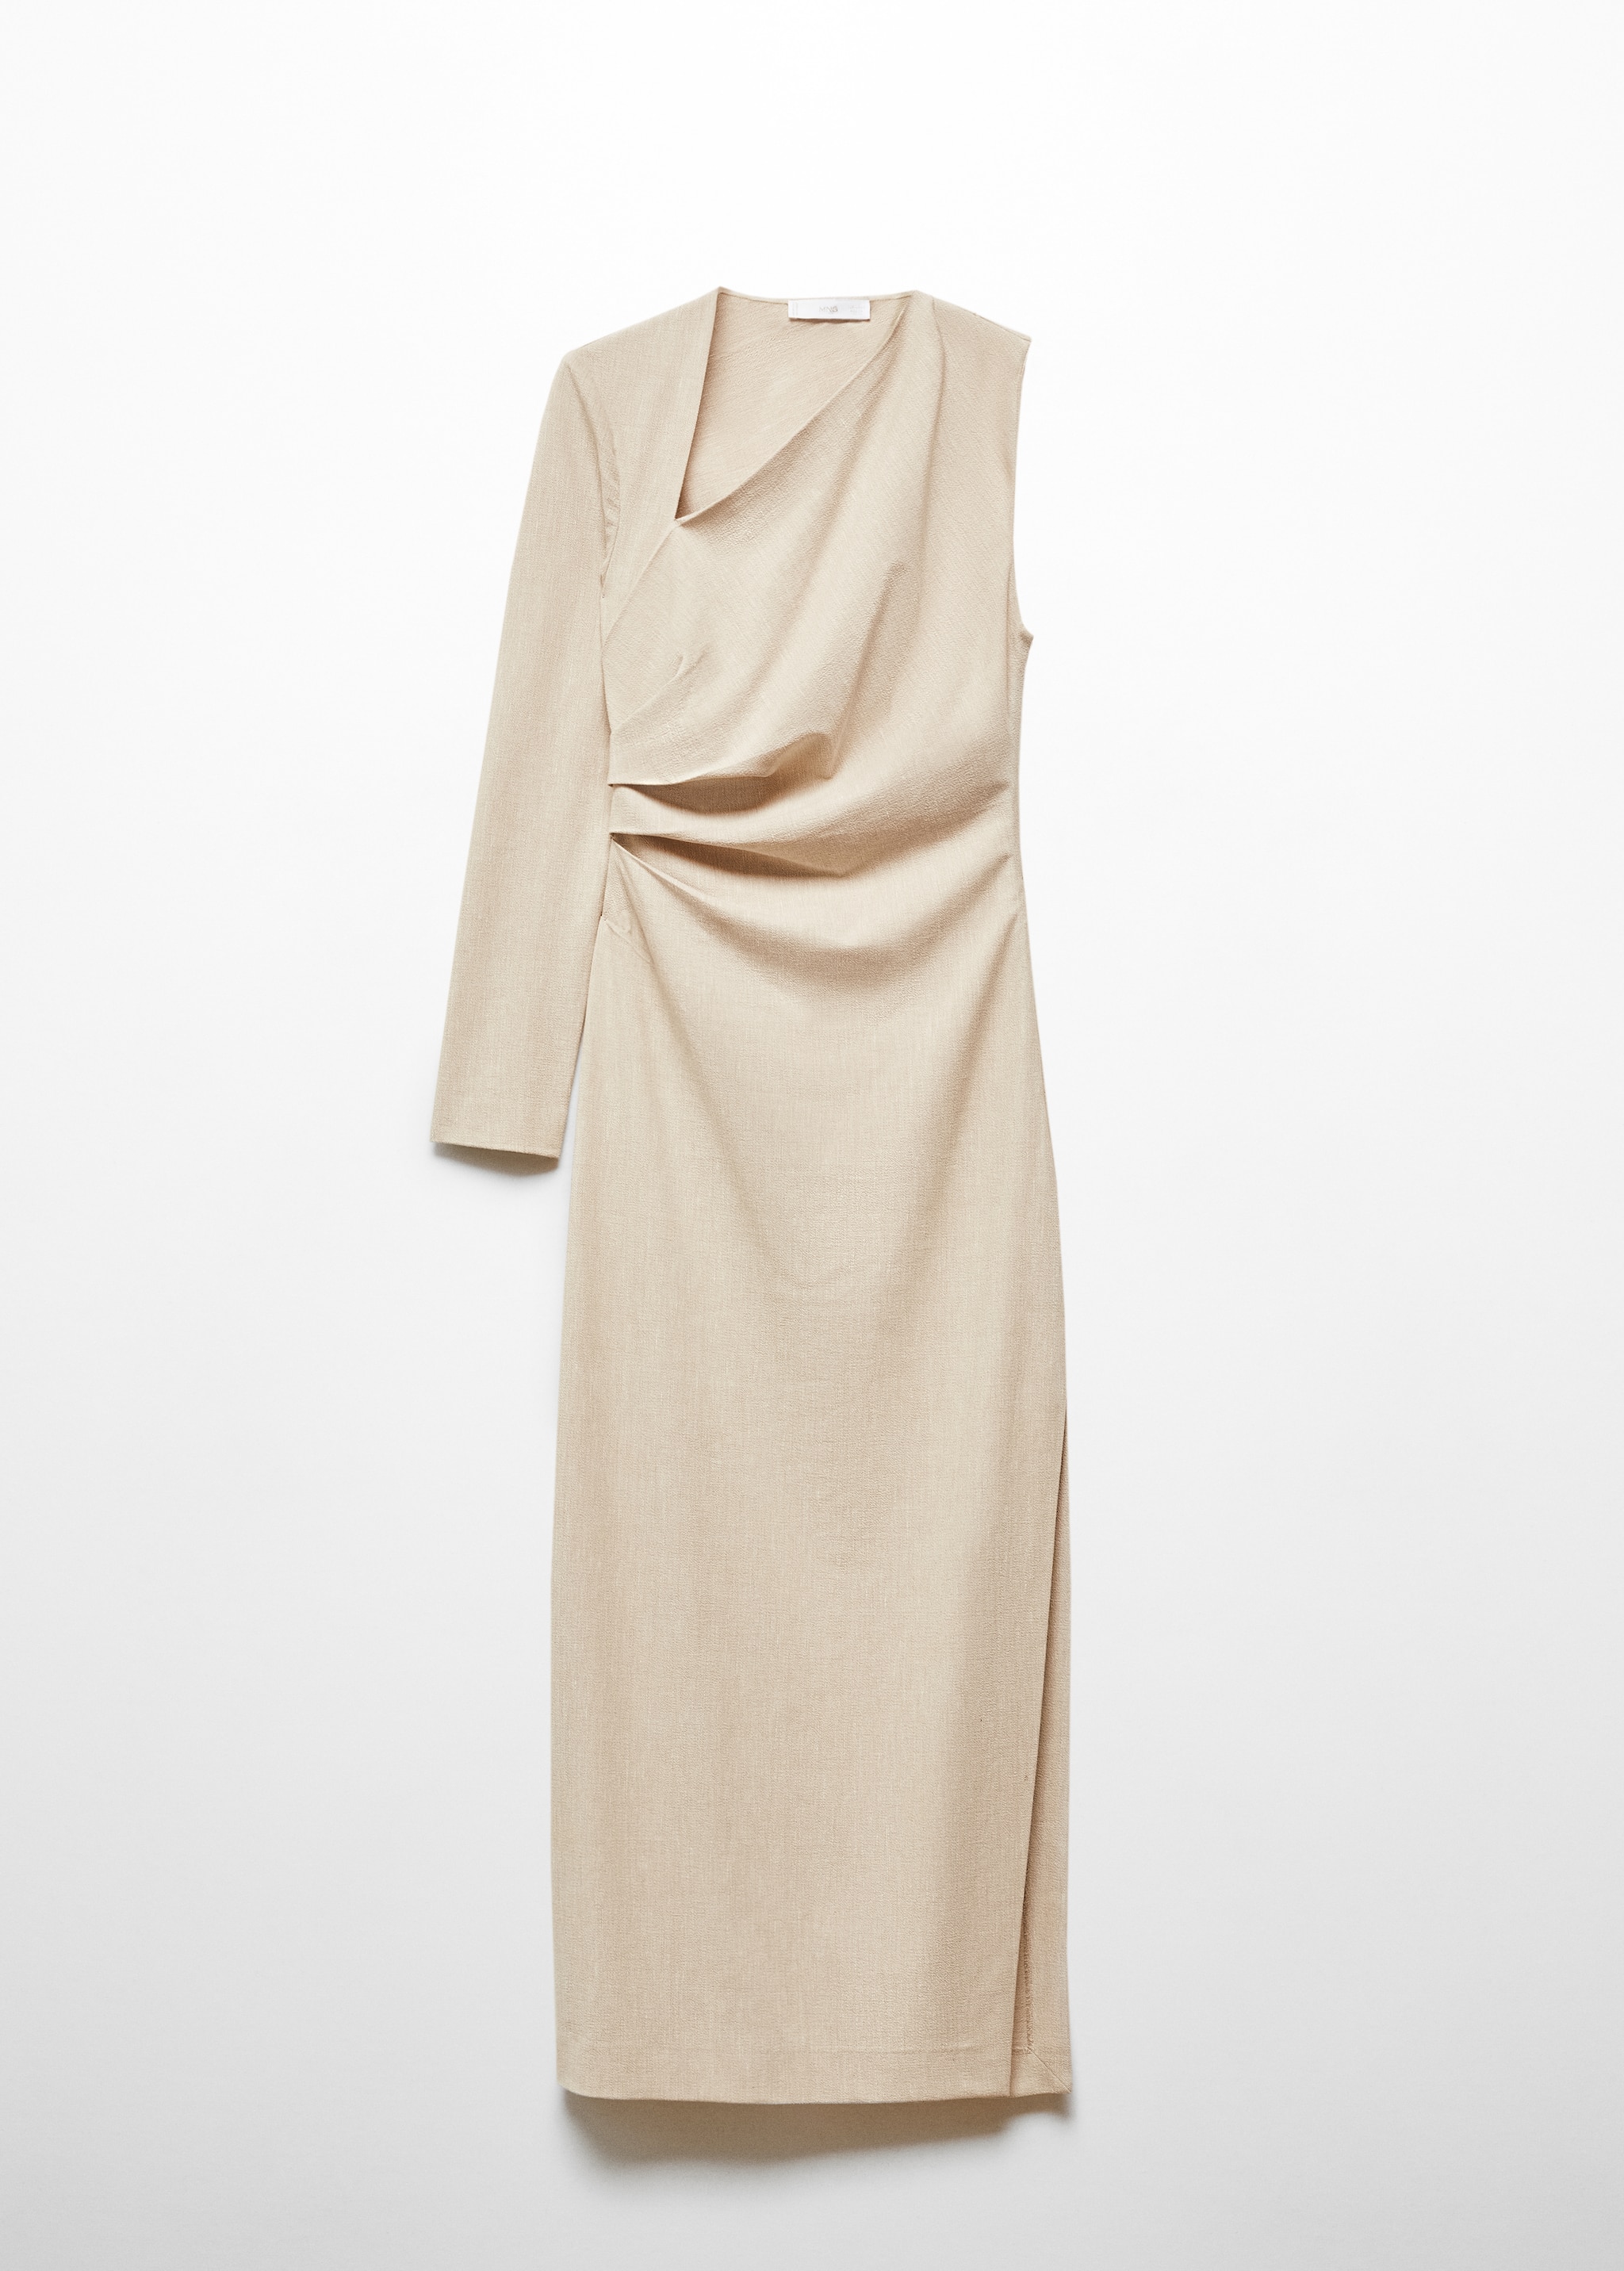 Asymmetric draped gown - Article without model